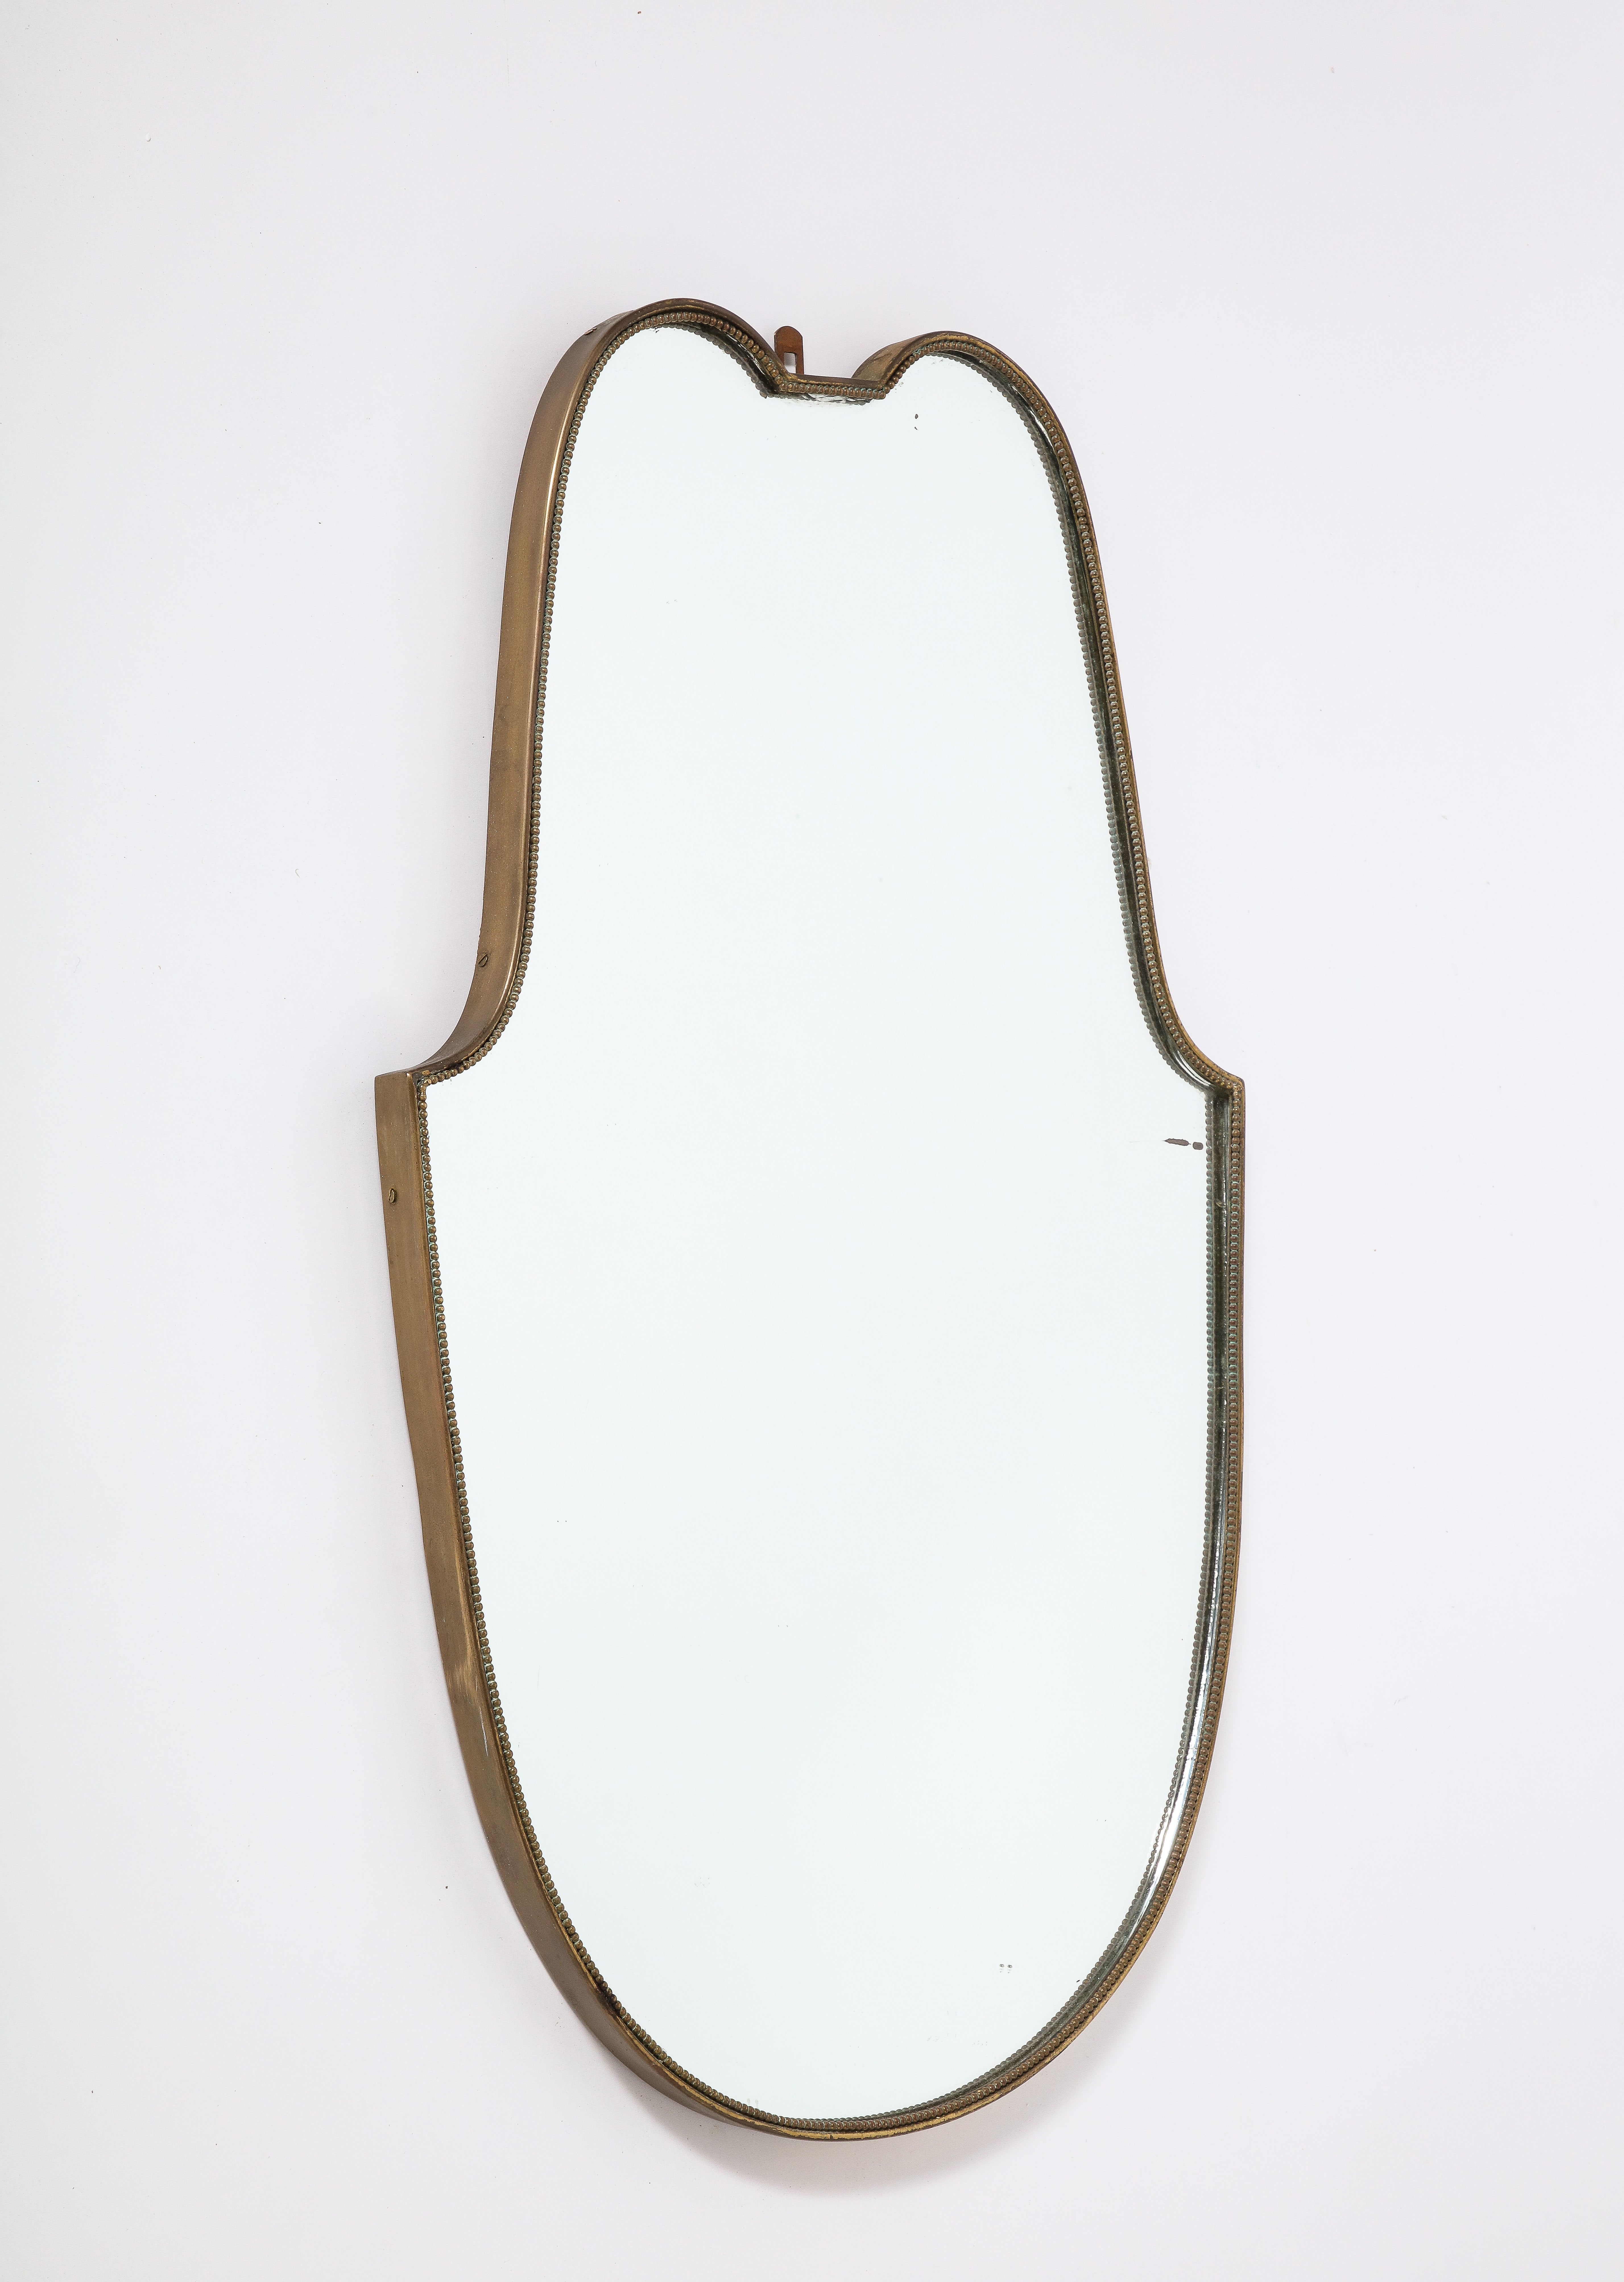 An Italian 1940's brass shield shaped mirror with beaded trim; the brass with a warm patina, mirror glass plate original. 
Italy, circa 1940 
Size: 30 1/2